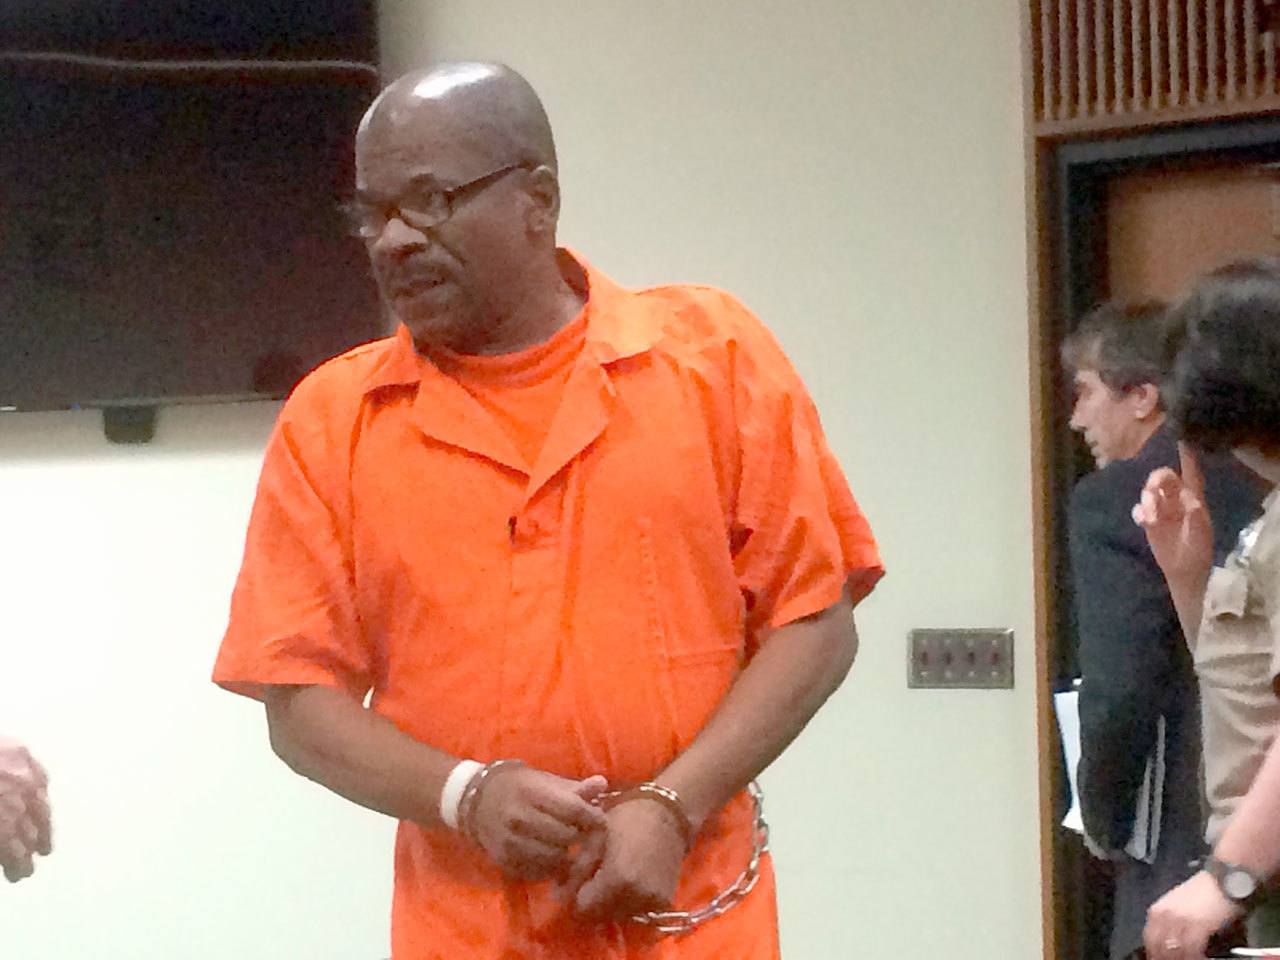 Tommy L. Ross Jr., accused of murdering a Port Angeles woman in 1978, has had his trial moved to this summer. (Paul Gottlieb/Peninsula Daily News)